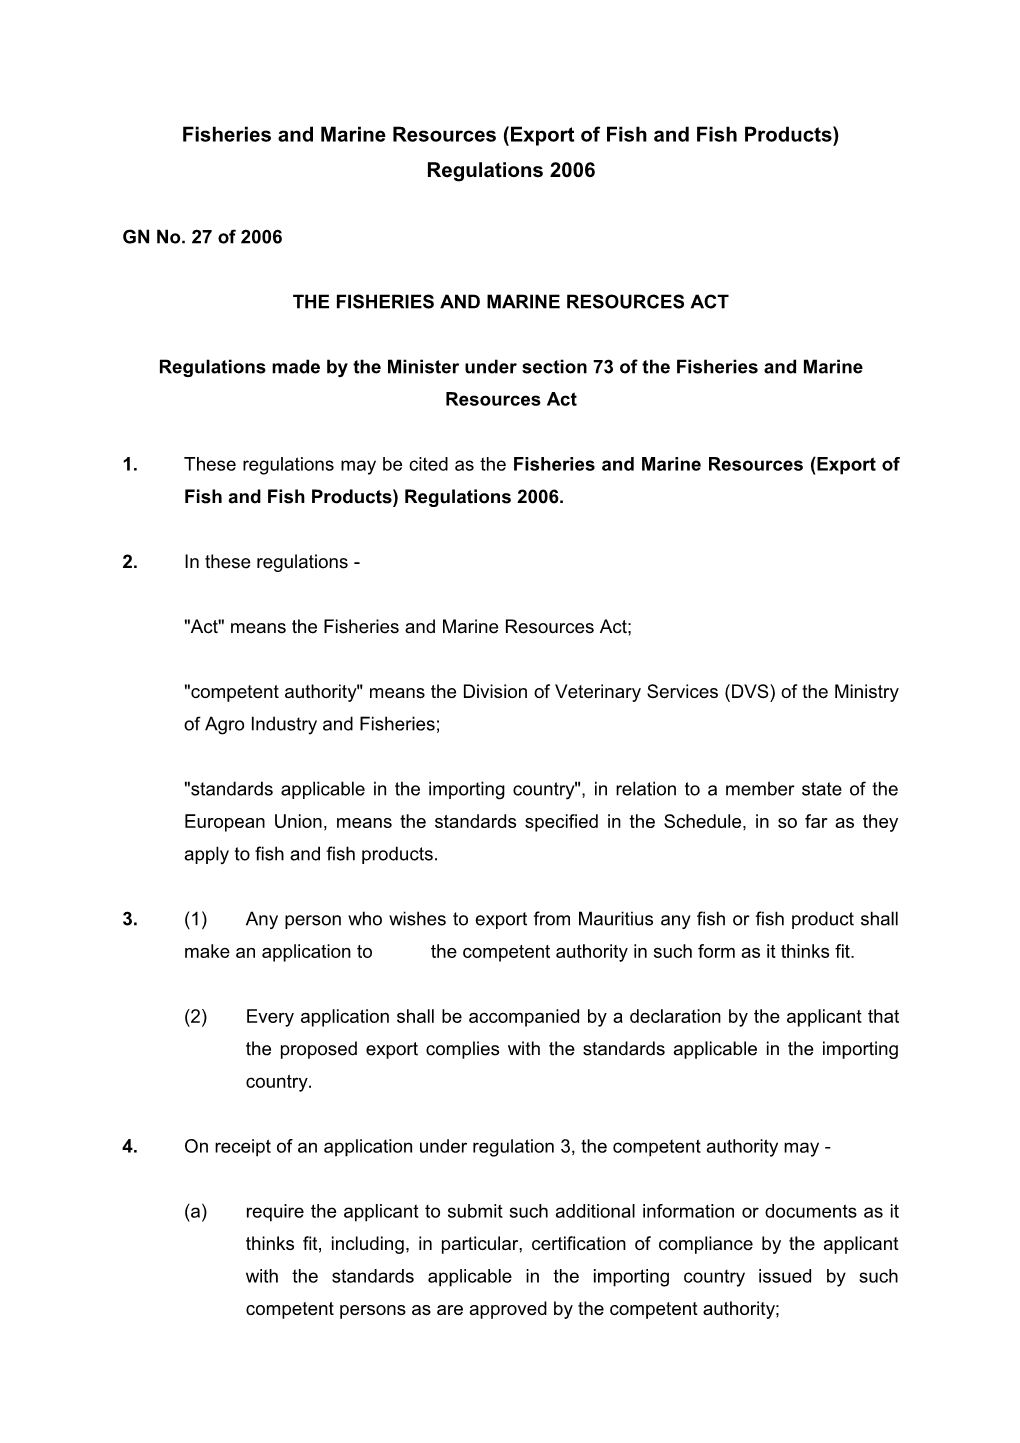 Fisheries and Marine Resources (Export of Fish and Fish Products) Regulations 2006